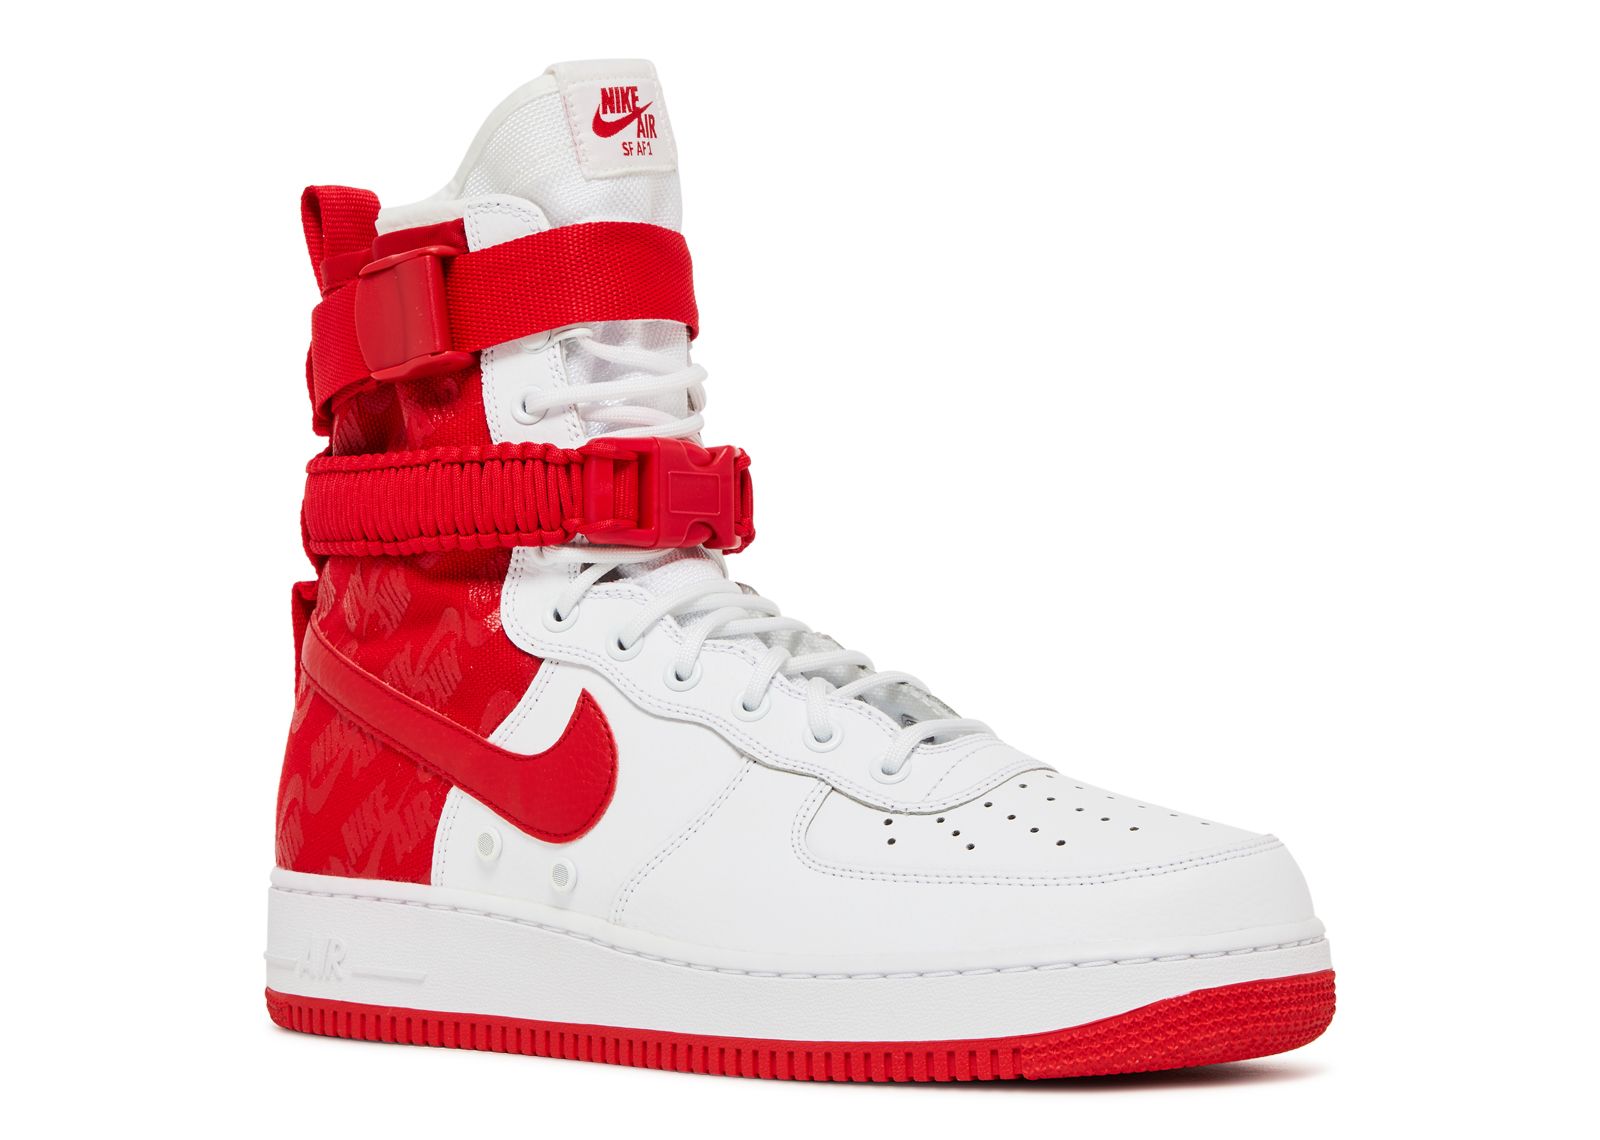 all red high top air force 1s